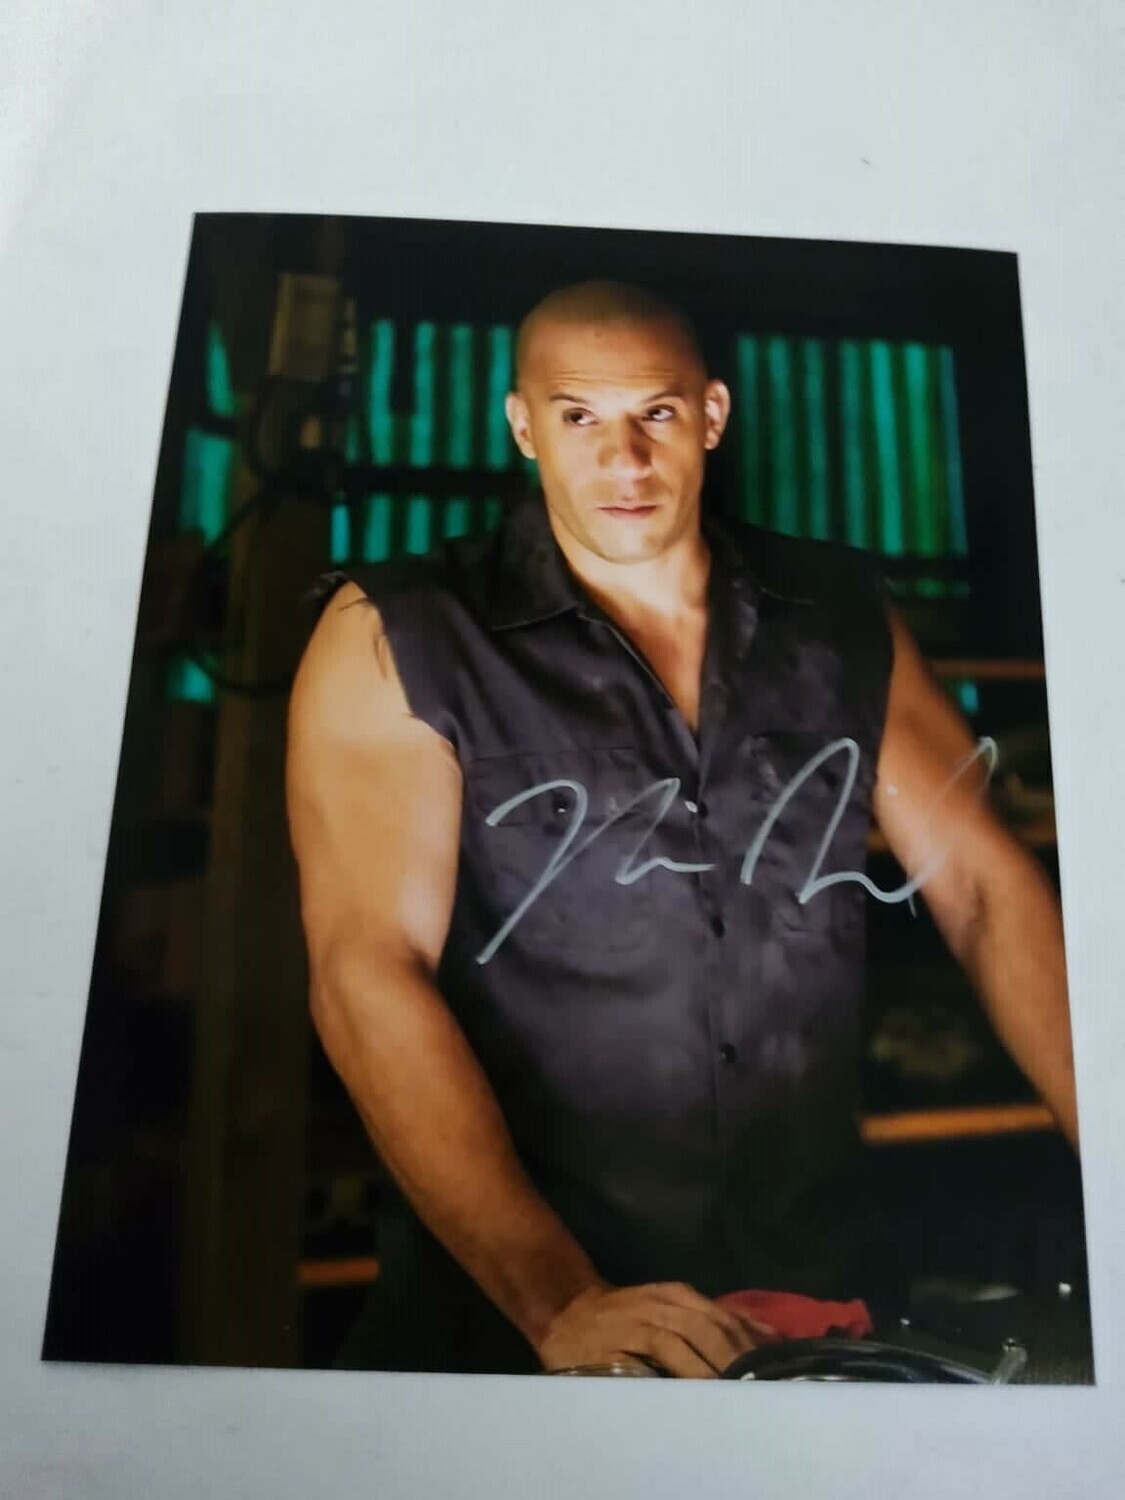 FOTO Vin Diesel Fast and Furious Autografata Signed + COA Photo Vin Diesel Fast and Furious Autografato Signed Toretto